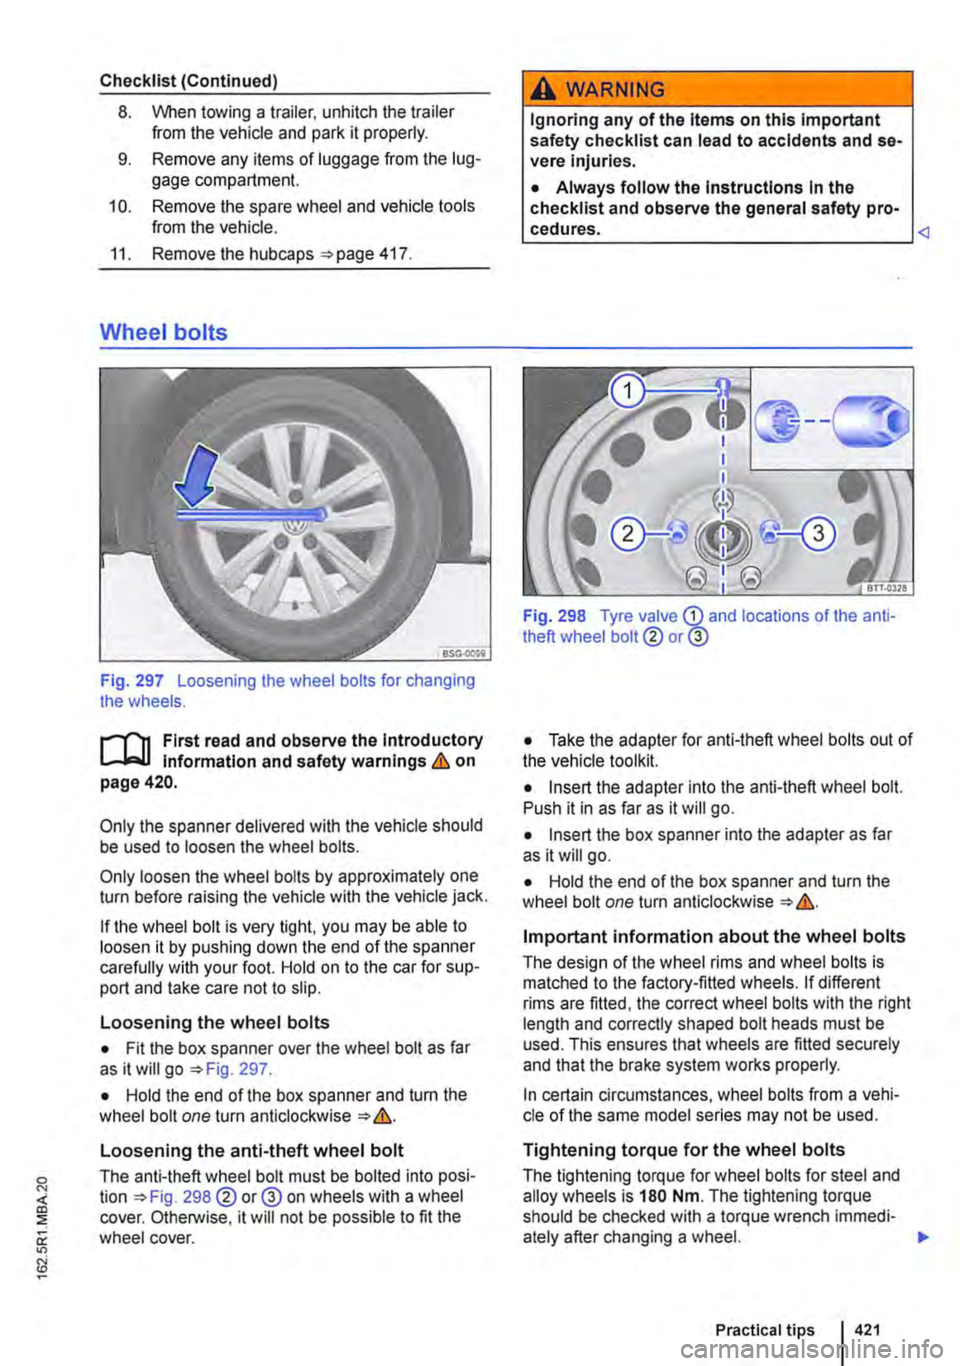 VOLKSWAGEN TRANSPORTER 2016  Owners Manual Checklist (Continued) 
8. VI/hen towing a trailer, unhitch the trailer from the vehicle and park it properly. 
9. Remove any items of luggage from the lug-gage compartment. 
10. Remove the spare wheel